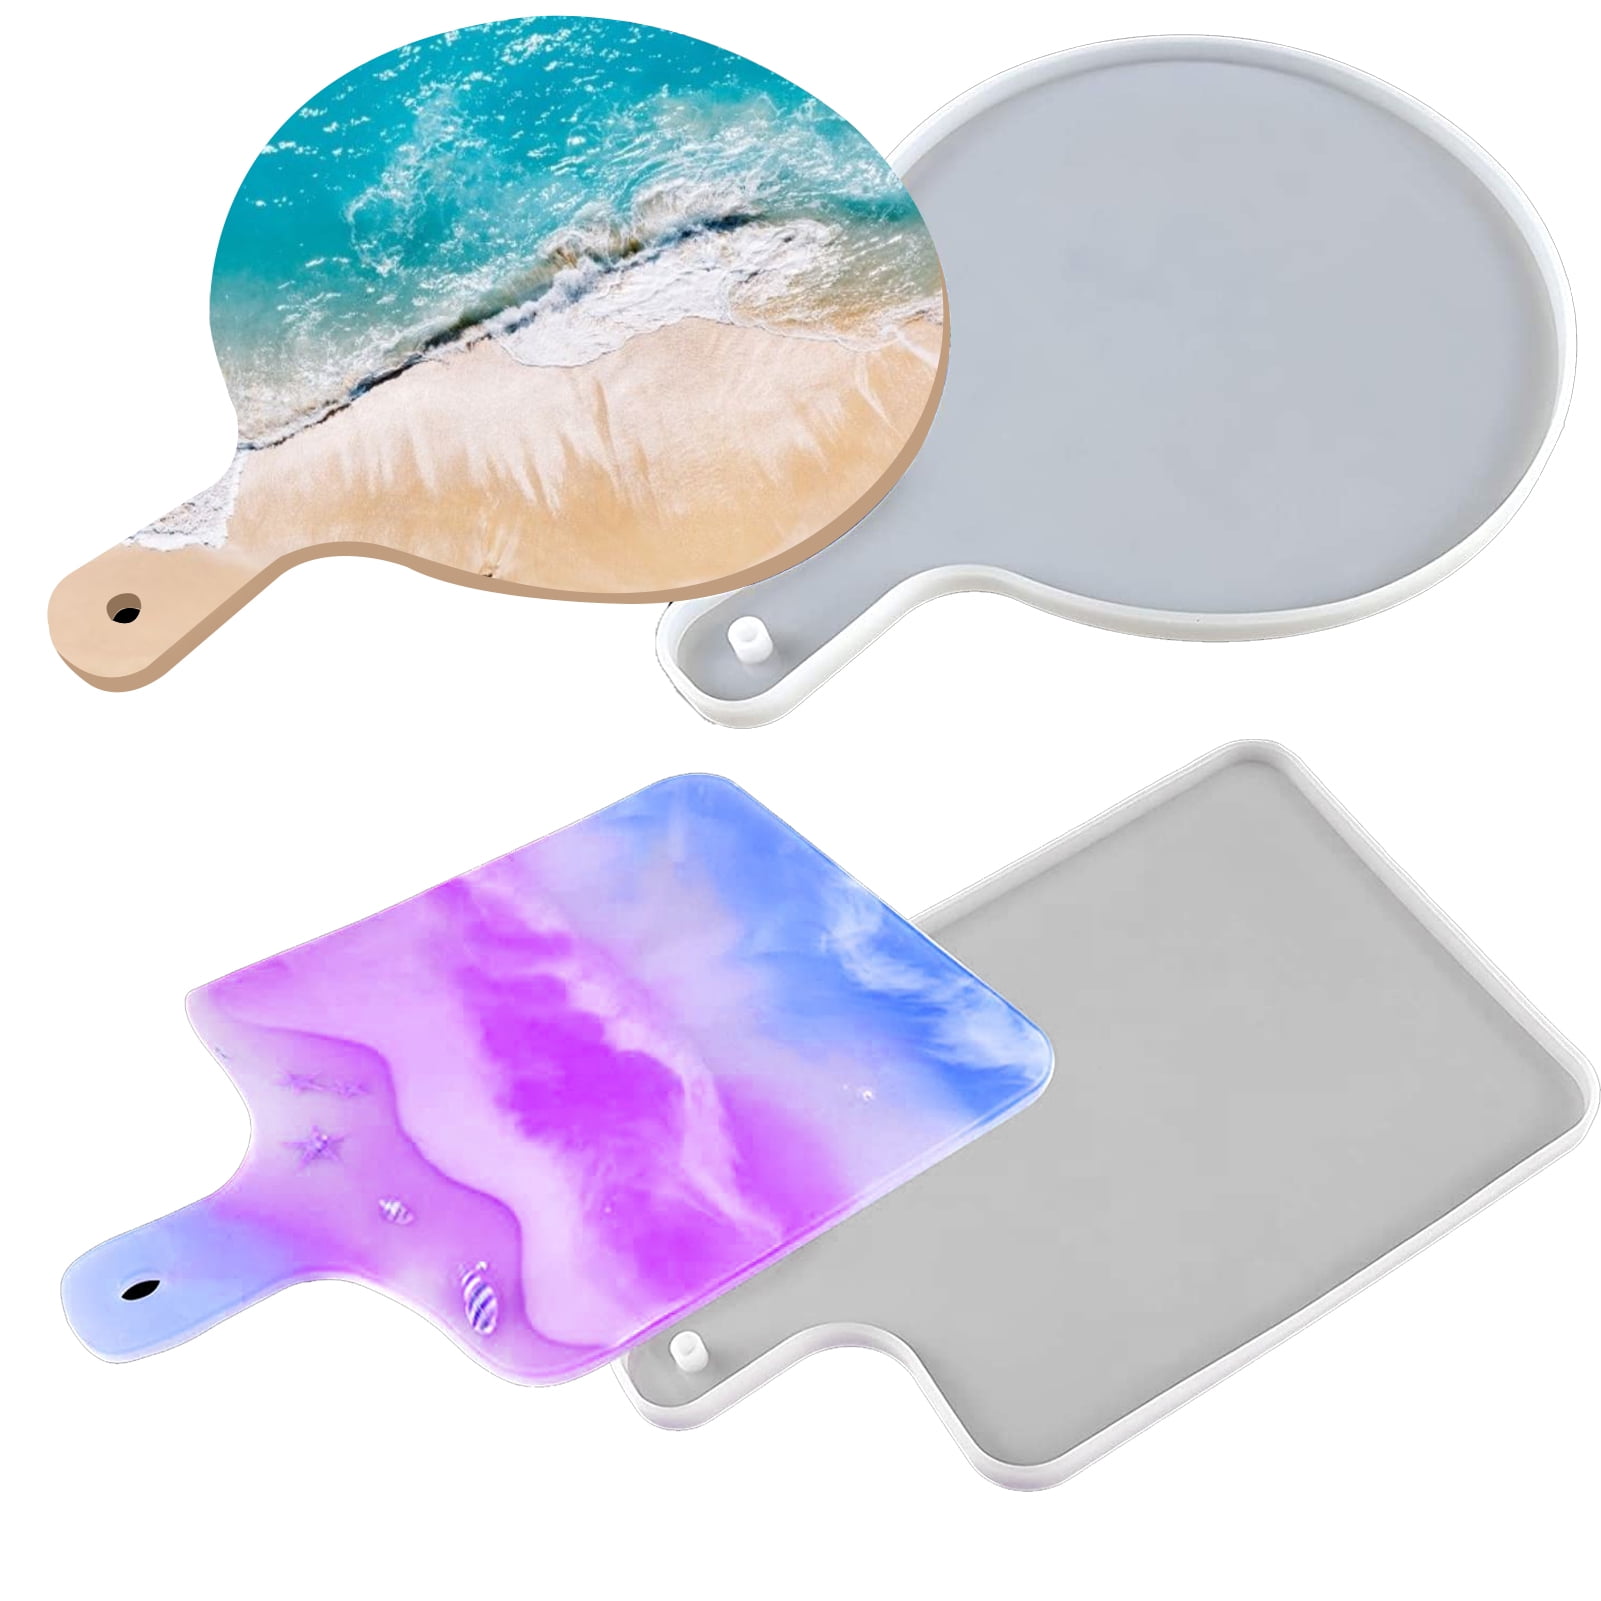 LET'S RESIN Resin Molds, Silicone Tray Molds for Epoxy Resin, DIY Resin  Serving Board, Resin Serving Tray, Great for Home Decoration 